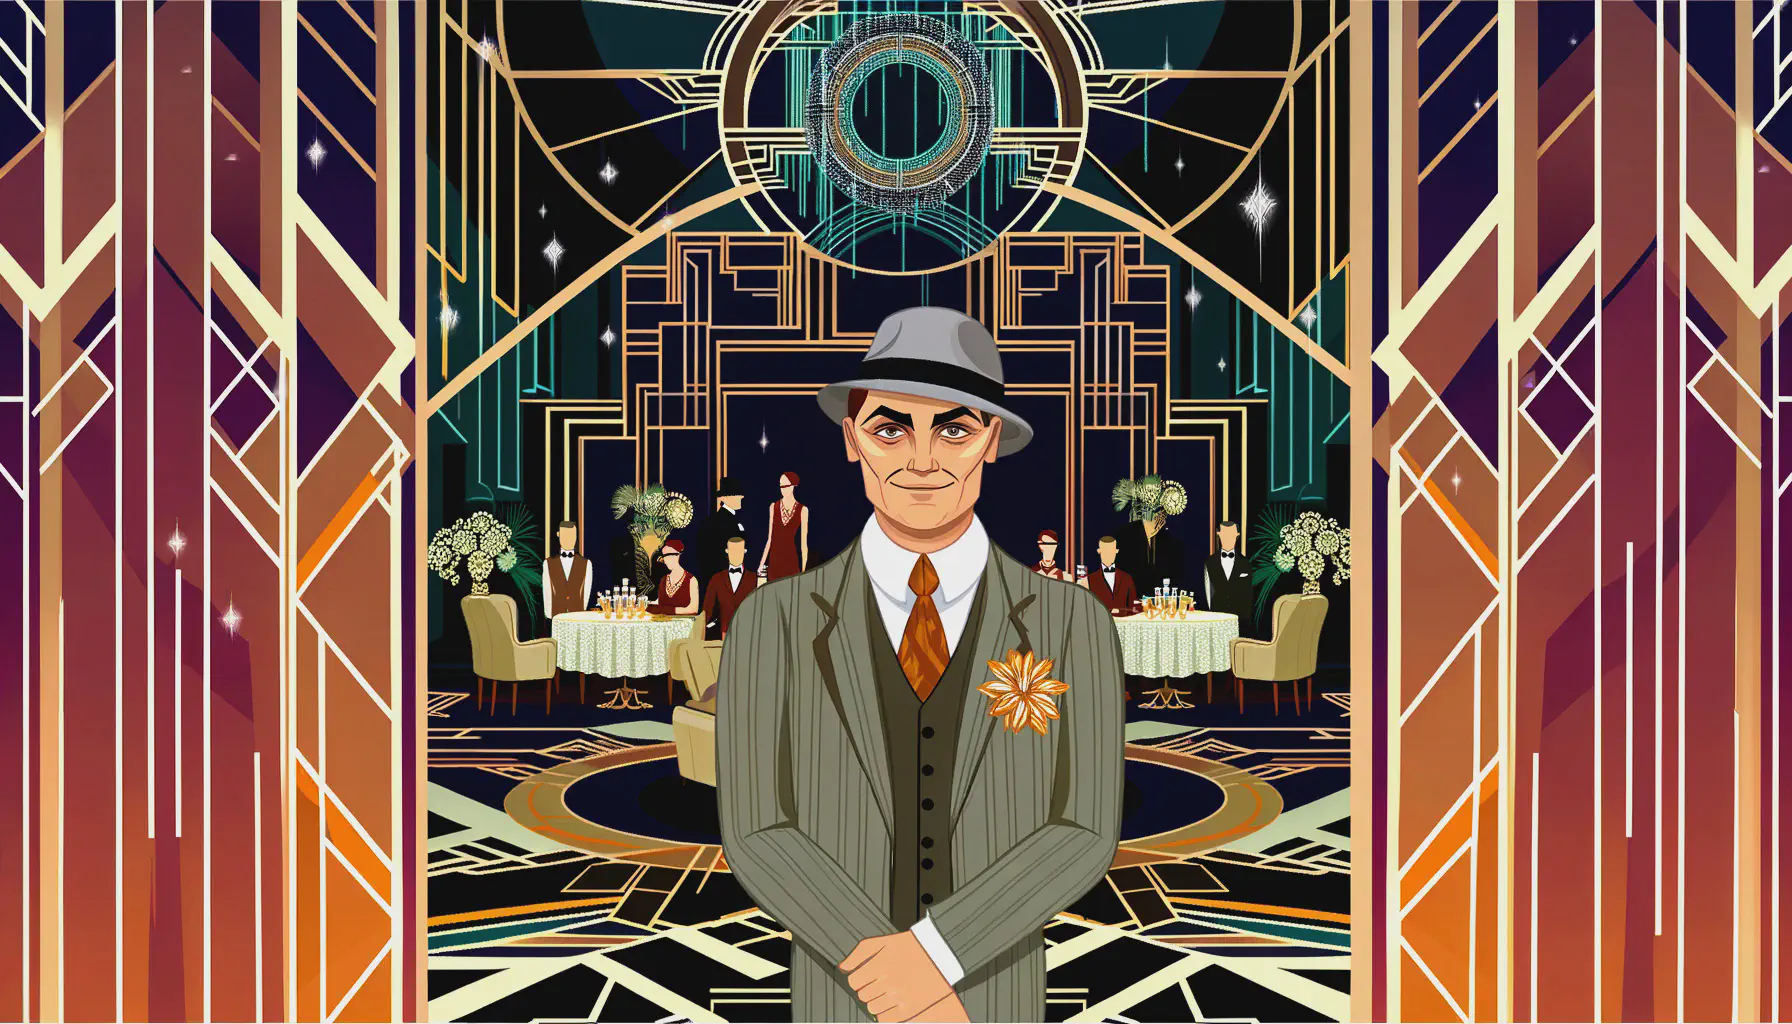 A mobster in Art Deco style.